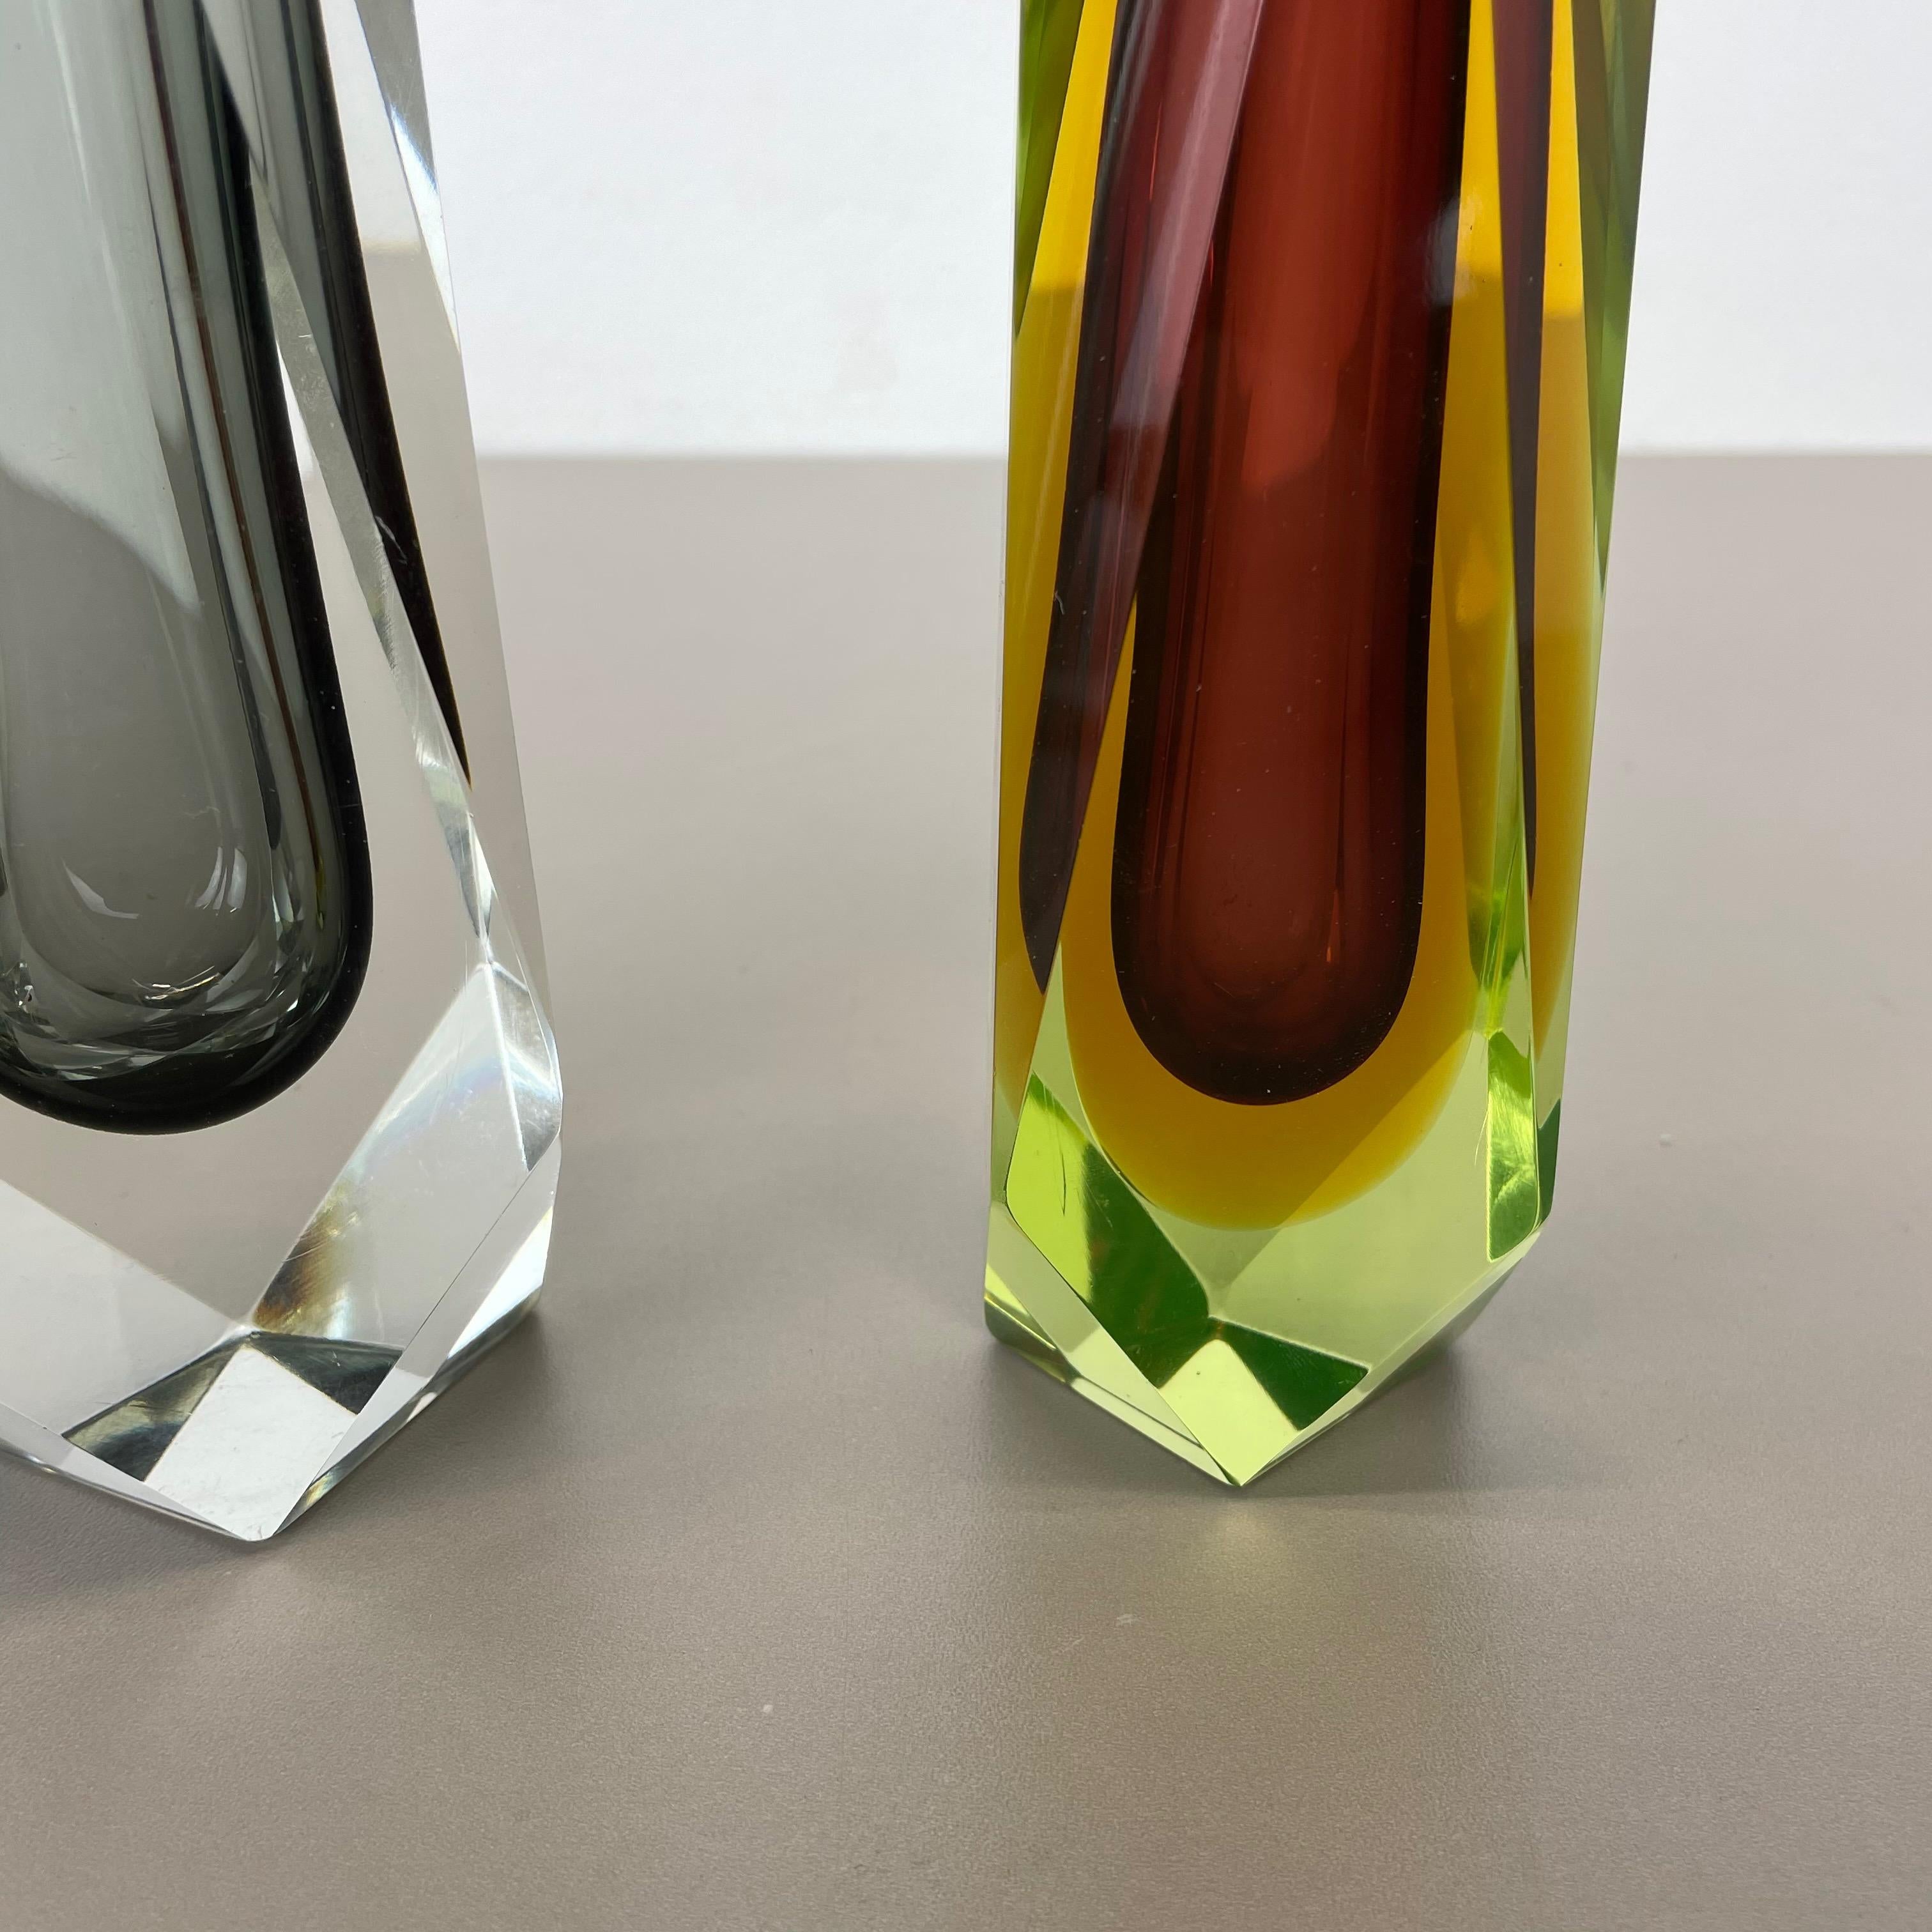 Rare Set of 2 Faceted Murano Glass Sommerso Vases, Italy, 1970s For Sale 6